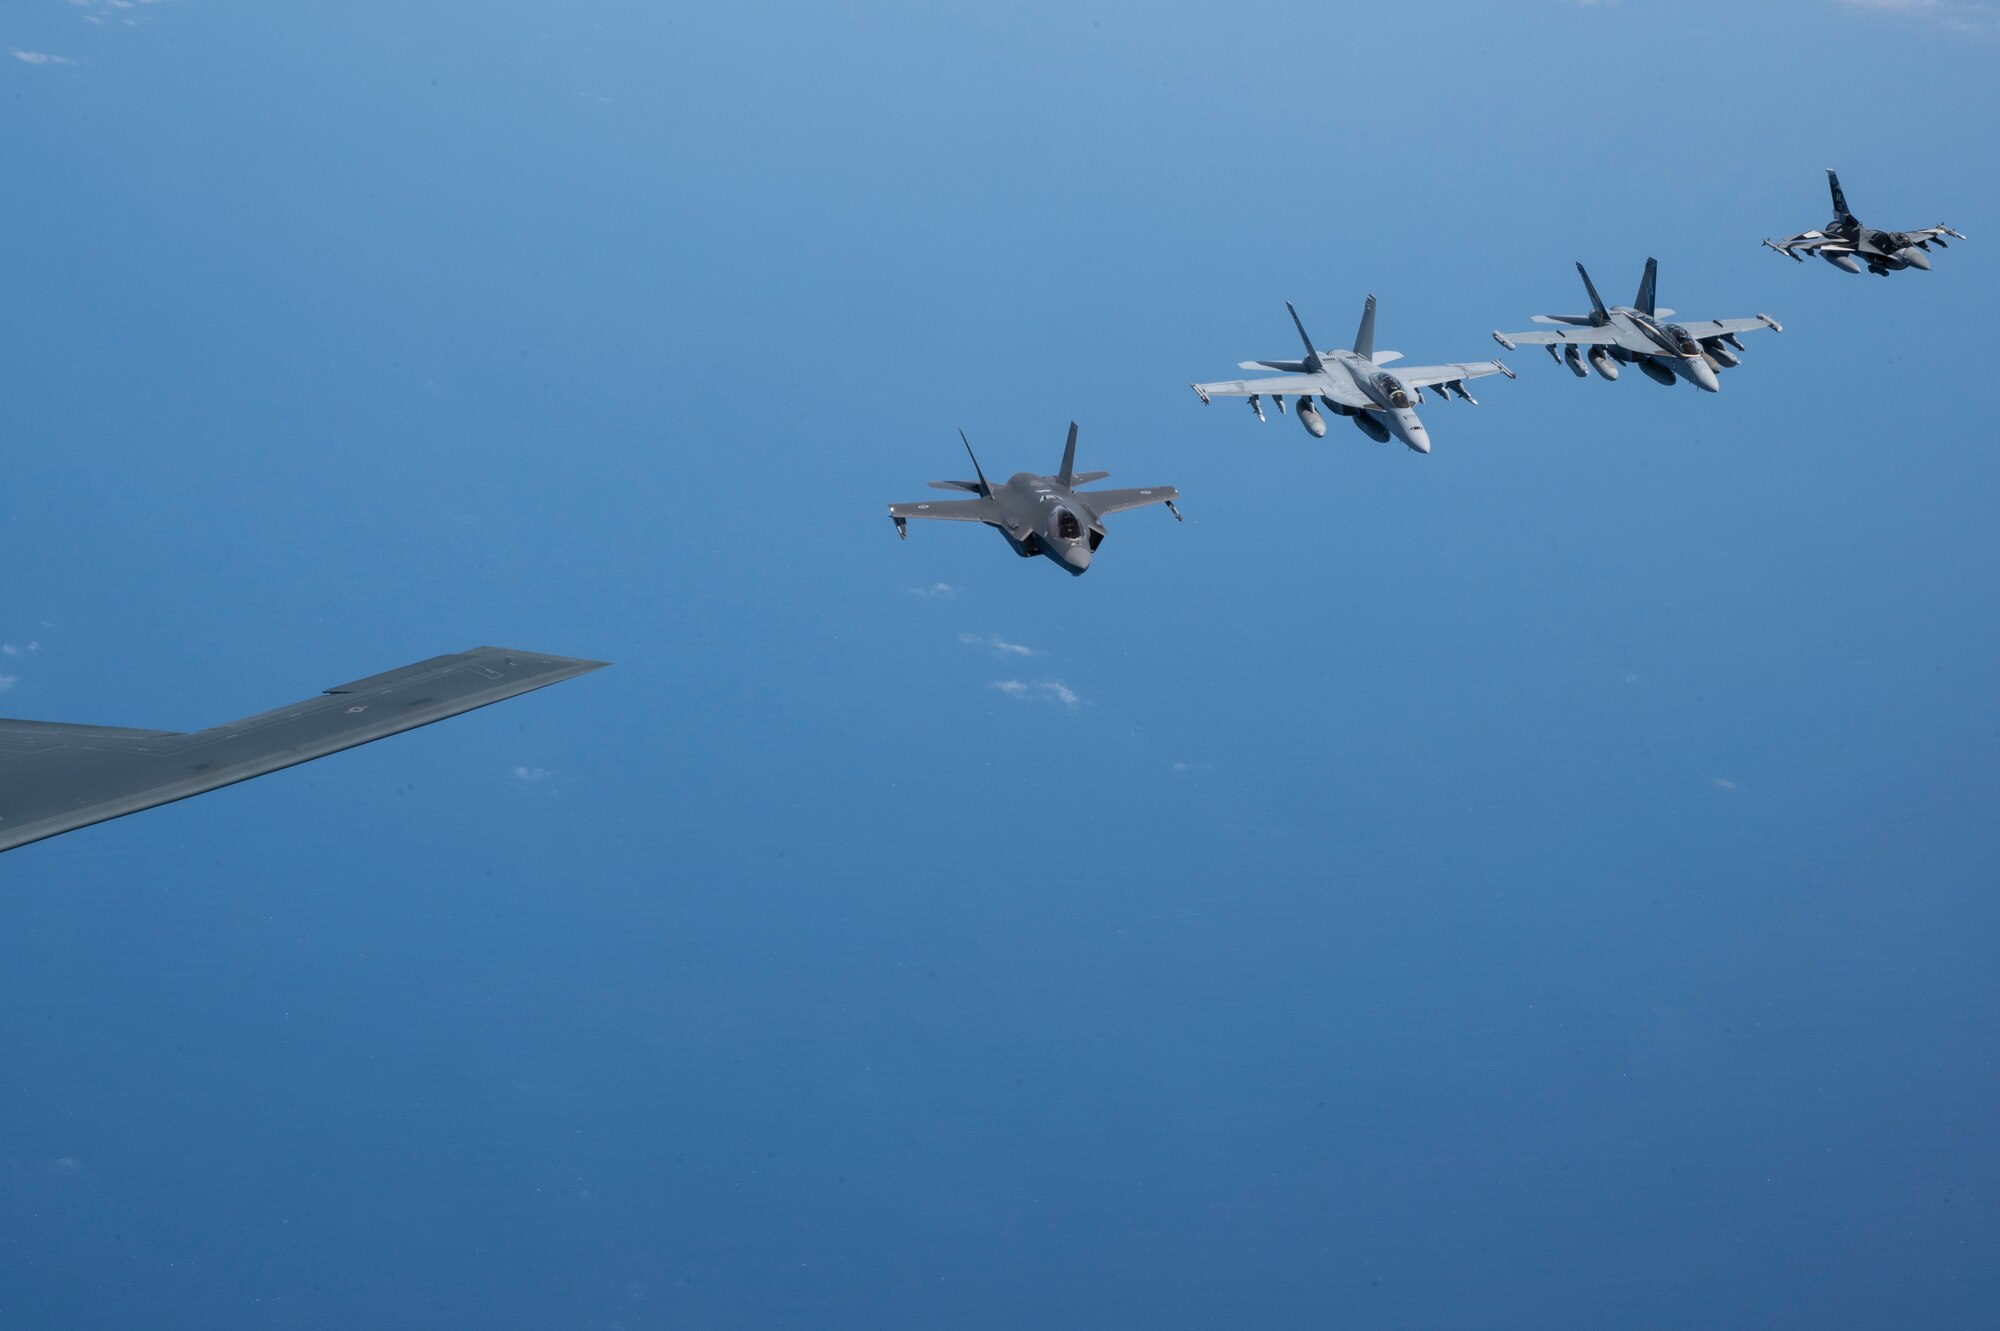 A U.S. Air force B-2 Spirit from Whiteman Air Force Base, Missouri, flies in formation with a Royal Australian Air Force F-35A Lightning IIs, two EA-18 Growlers, two RAAF F/A-18F Super Hornets and two U.S. Air Force F-16C Aggressors from Eielson Air Force Base, Alaska during a CONUS-to-CONUS training mission in the Indo-Pacific region, March 23, 2022. After integrating in Australian airspace, the B-2 pilots landed at Amberley—for the first time ever—and conducted a crew swap on the ground before becoming airborne and integrating with F-22 Raptors from Joint Base Pearl Harbor-Hickam, Hawaii, then returning back to Whiteman. (U.S. Air Force photo by Tech. Sgt. Hailey Haux)